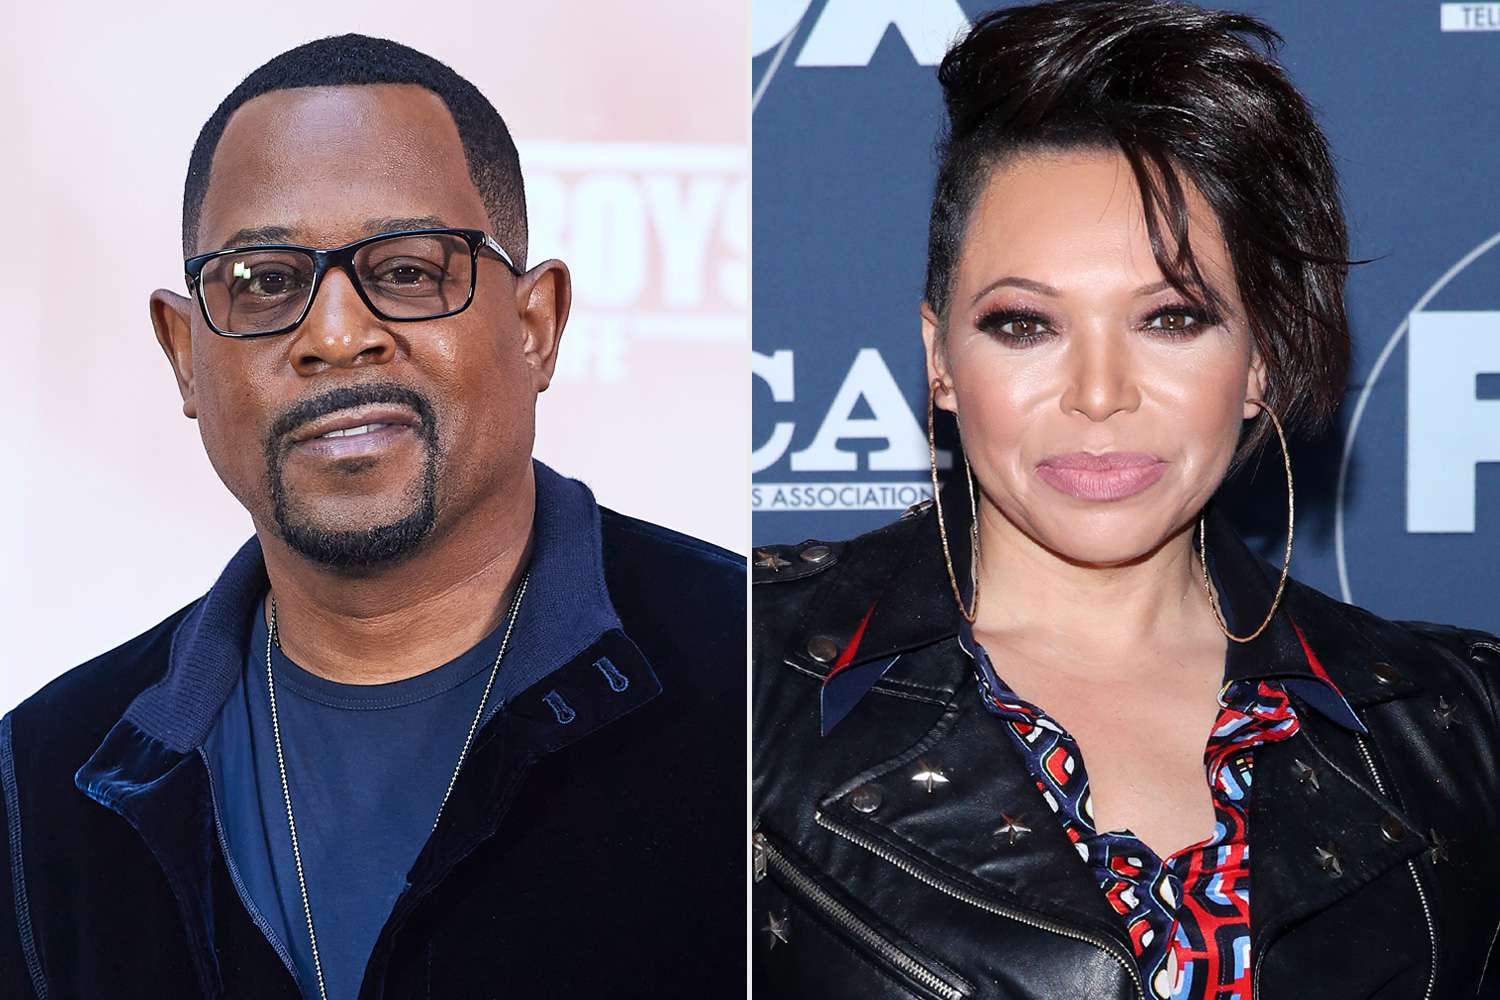 Why Did Tisha Campbell File a Lawsuit Against Martin Lawrence?